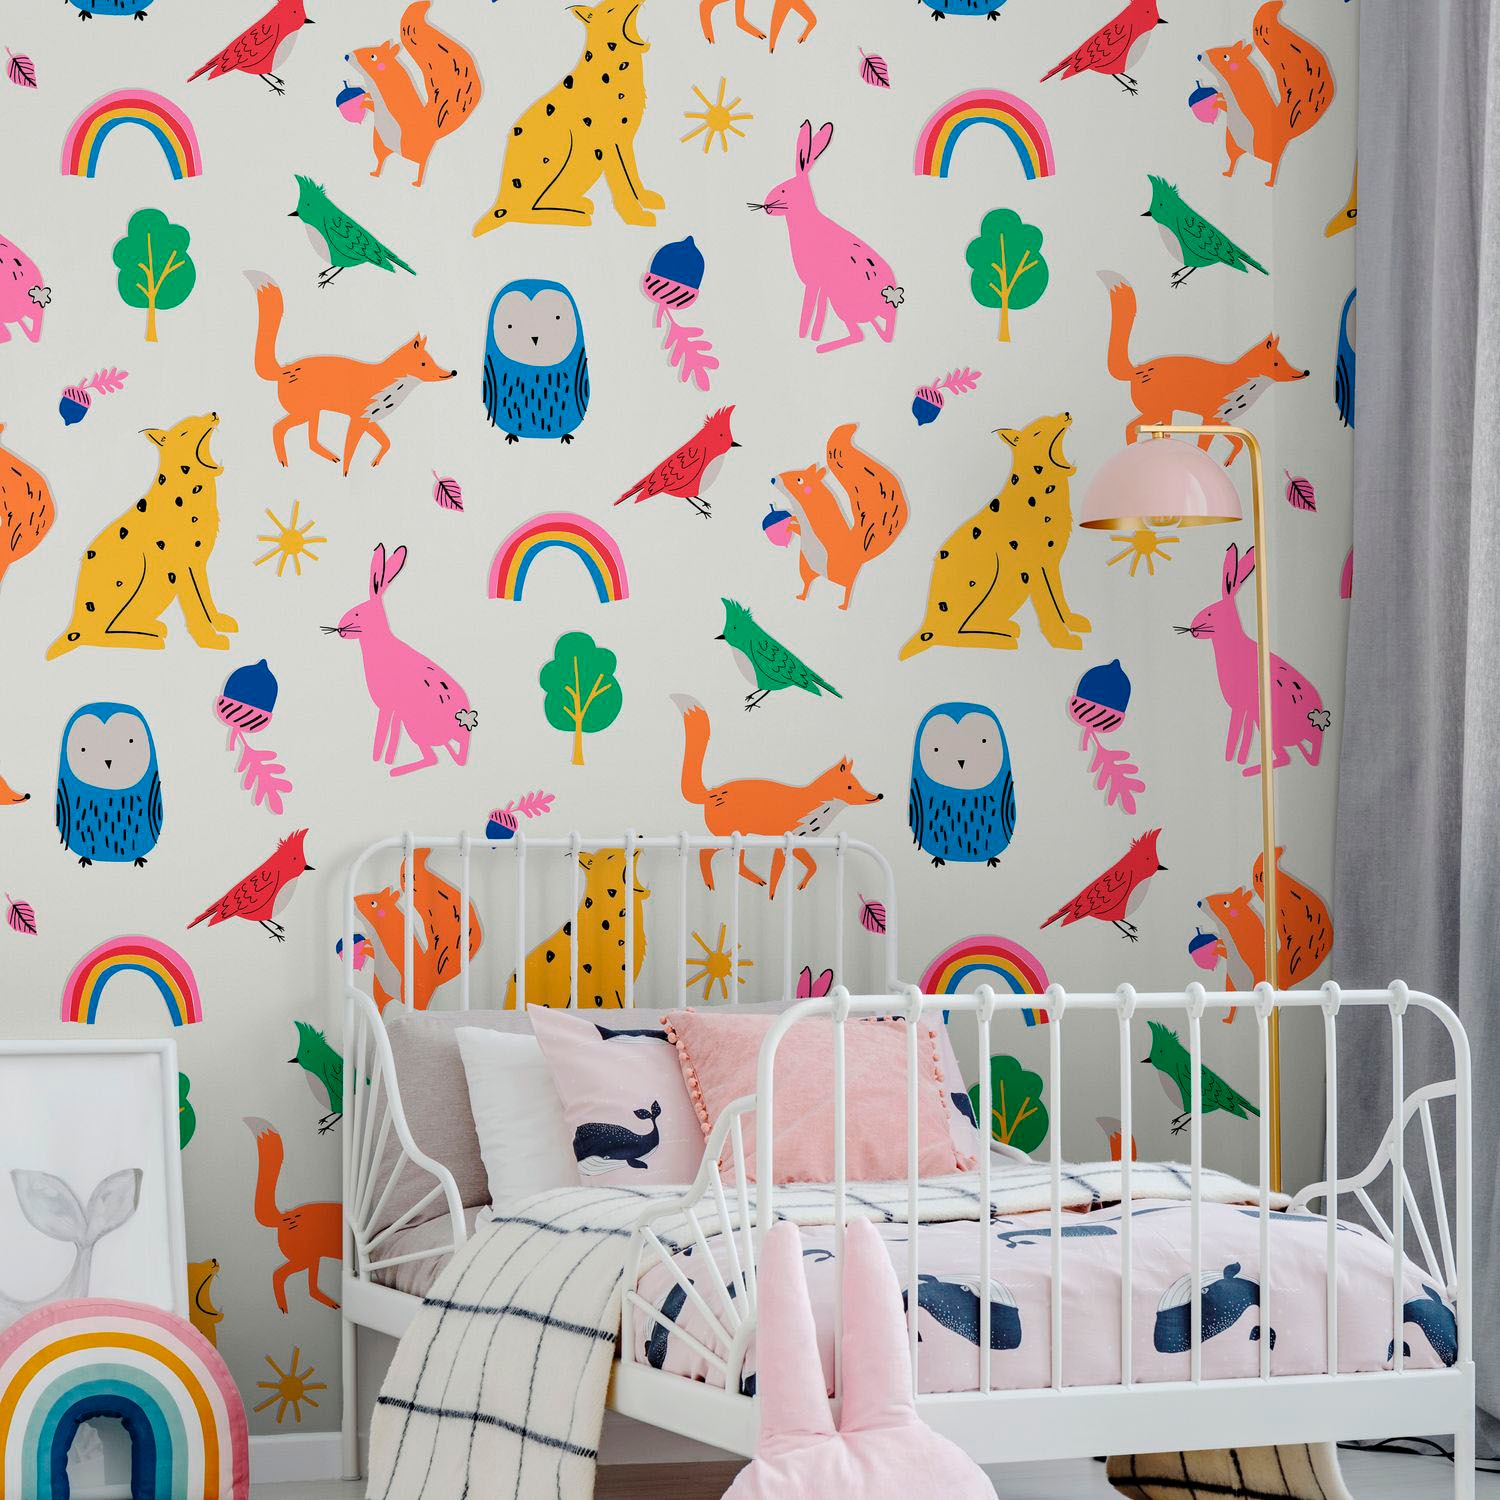 Joules Vliestapete »Country Critters Heroes White / Rainbow«, Motiv